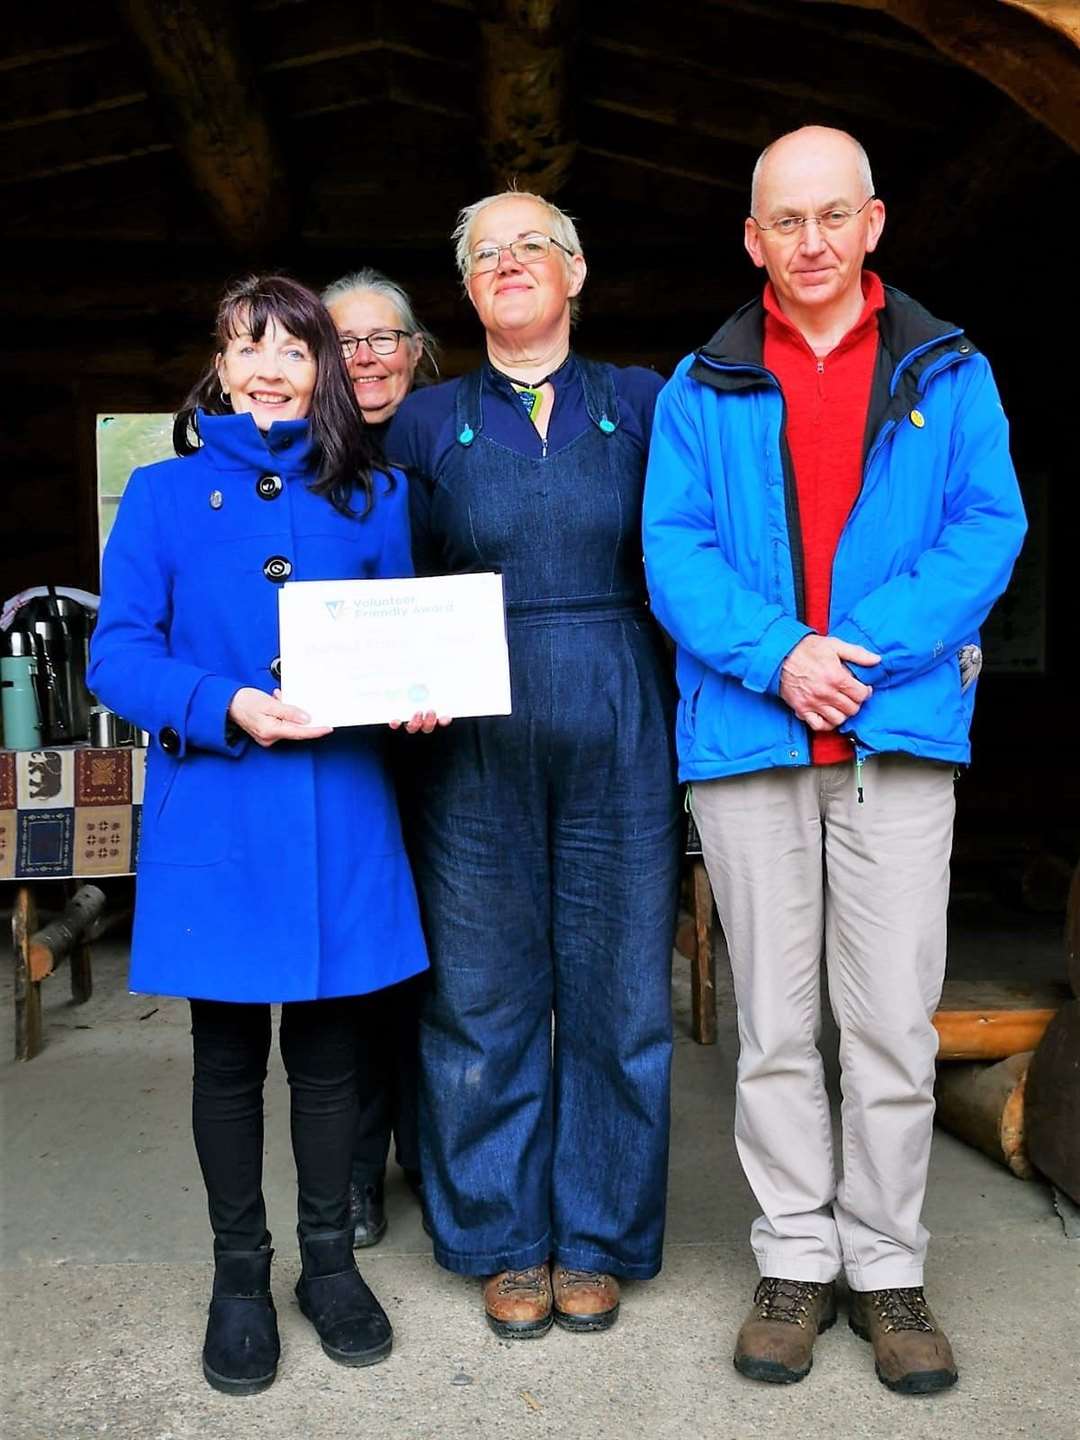 The Volunteer Friendly Award being presented to Dunnet Forestry Trust (DFT) director, Stephen Frame from Catherine Patterson of Caithness Voluntary Group. Also present were DFT's treasurer Shona Scatchard (at rear) and its development officer Garance Warburton.